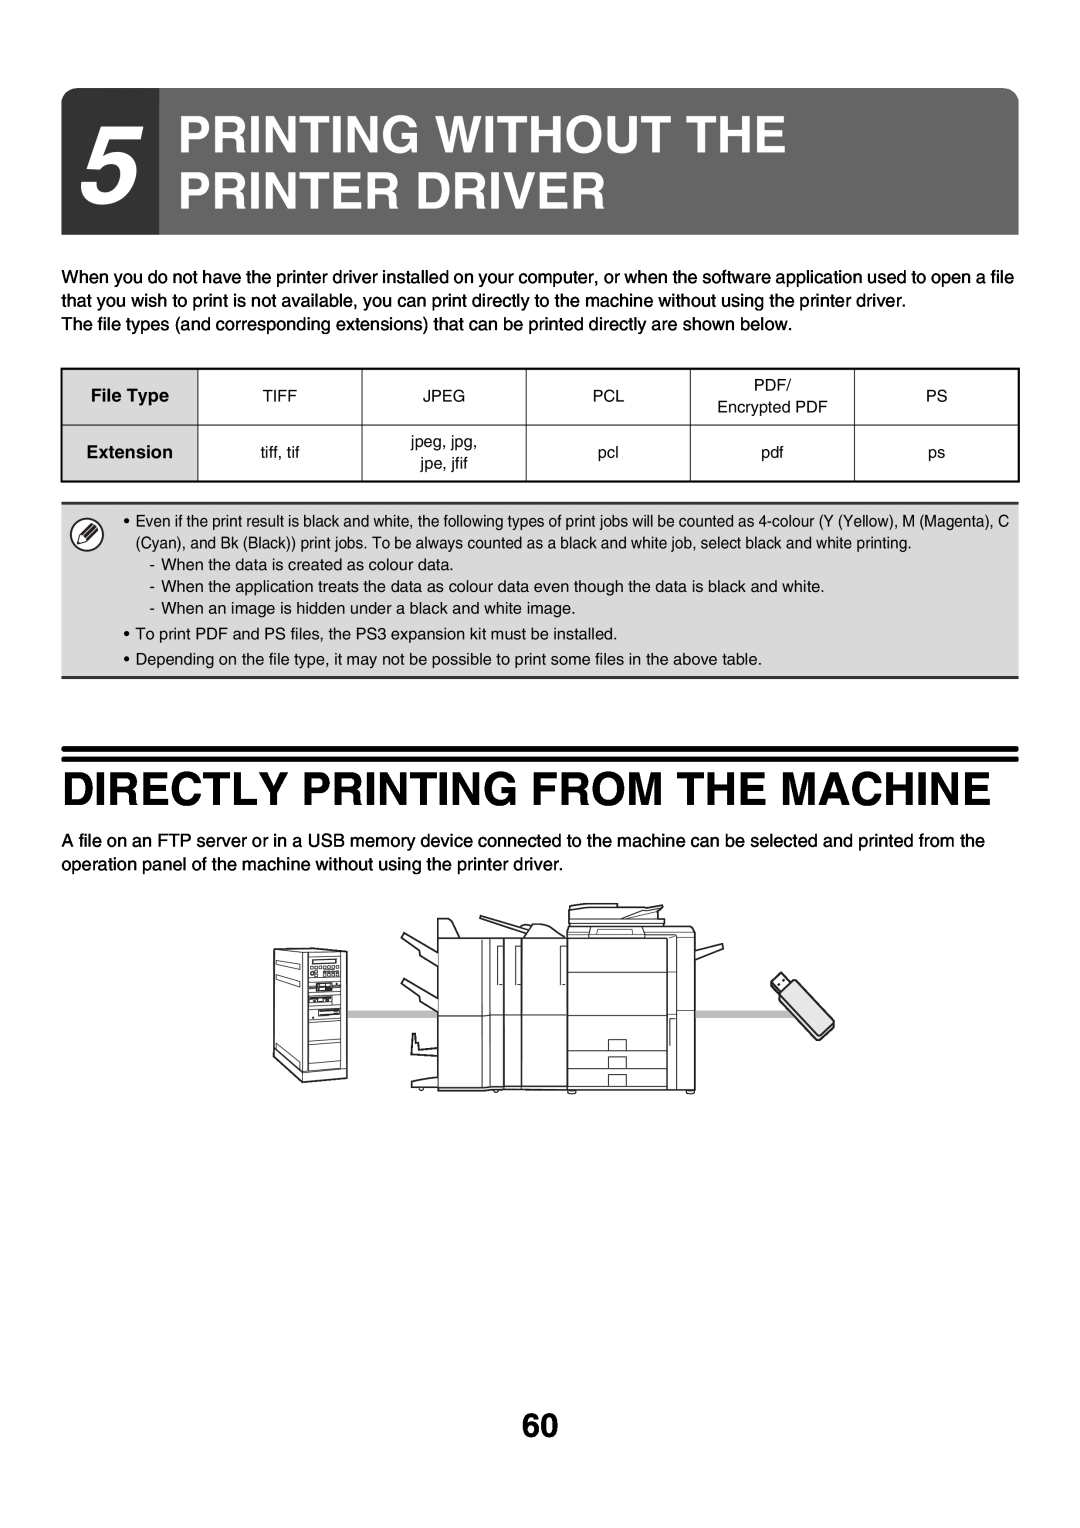 Sharp MX-6200N, MX-7000N, MX-5500N manual Printing Without The Printer Driver, Directly Printing From The Machine 